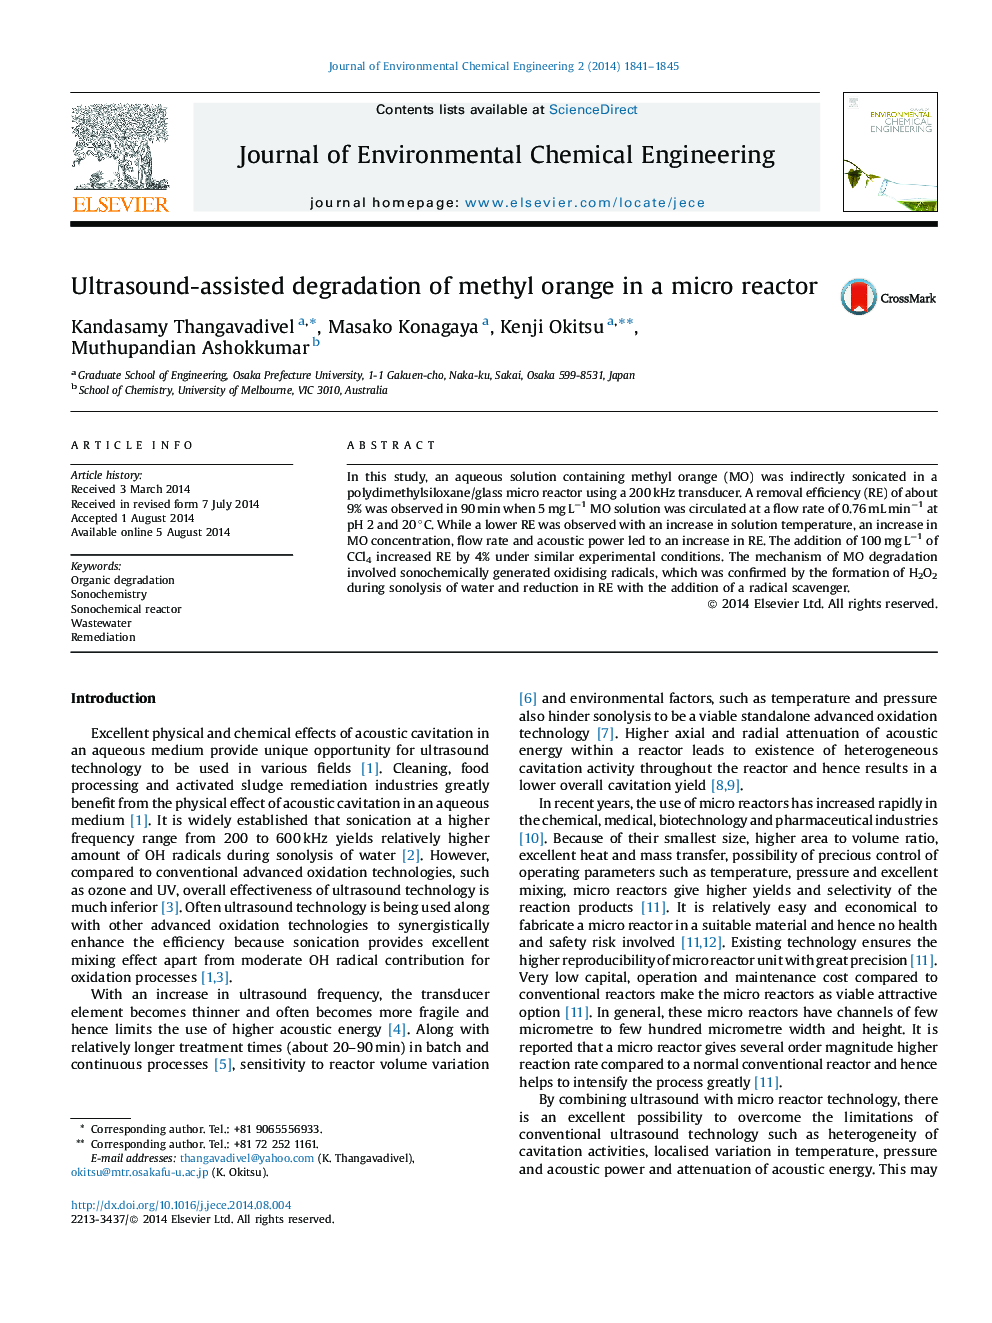 Ultrasound-assisted degradation of methyl orange in a micro reactor